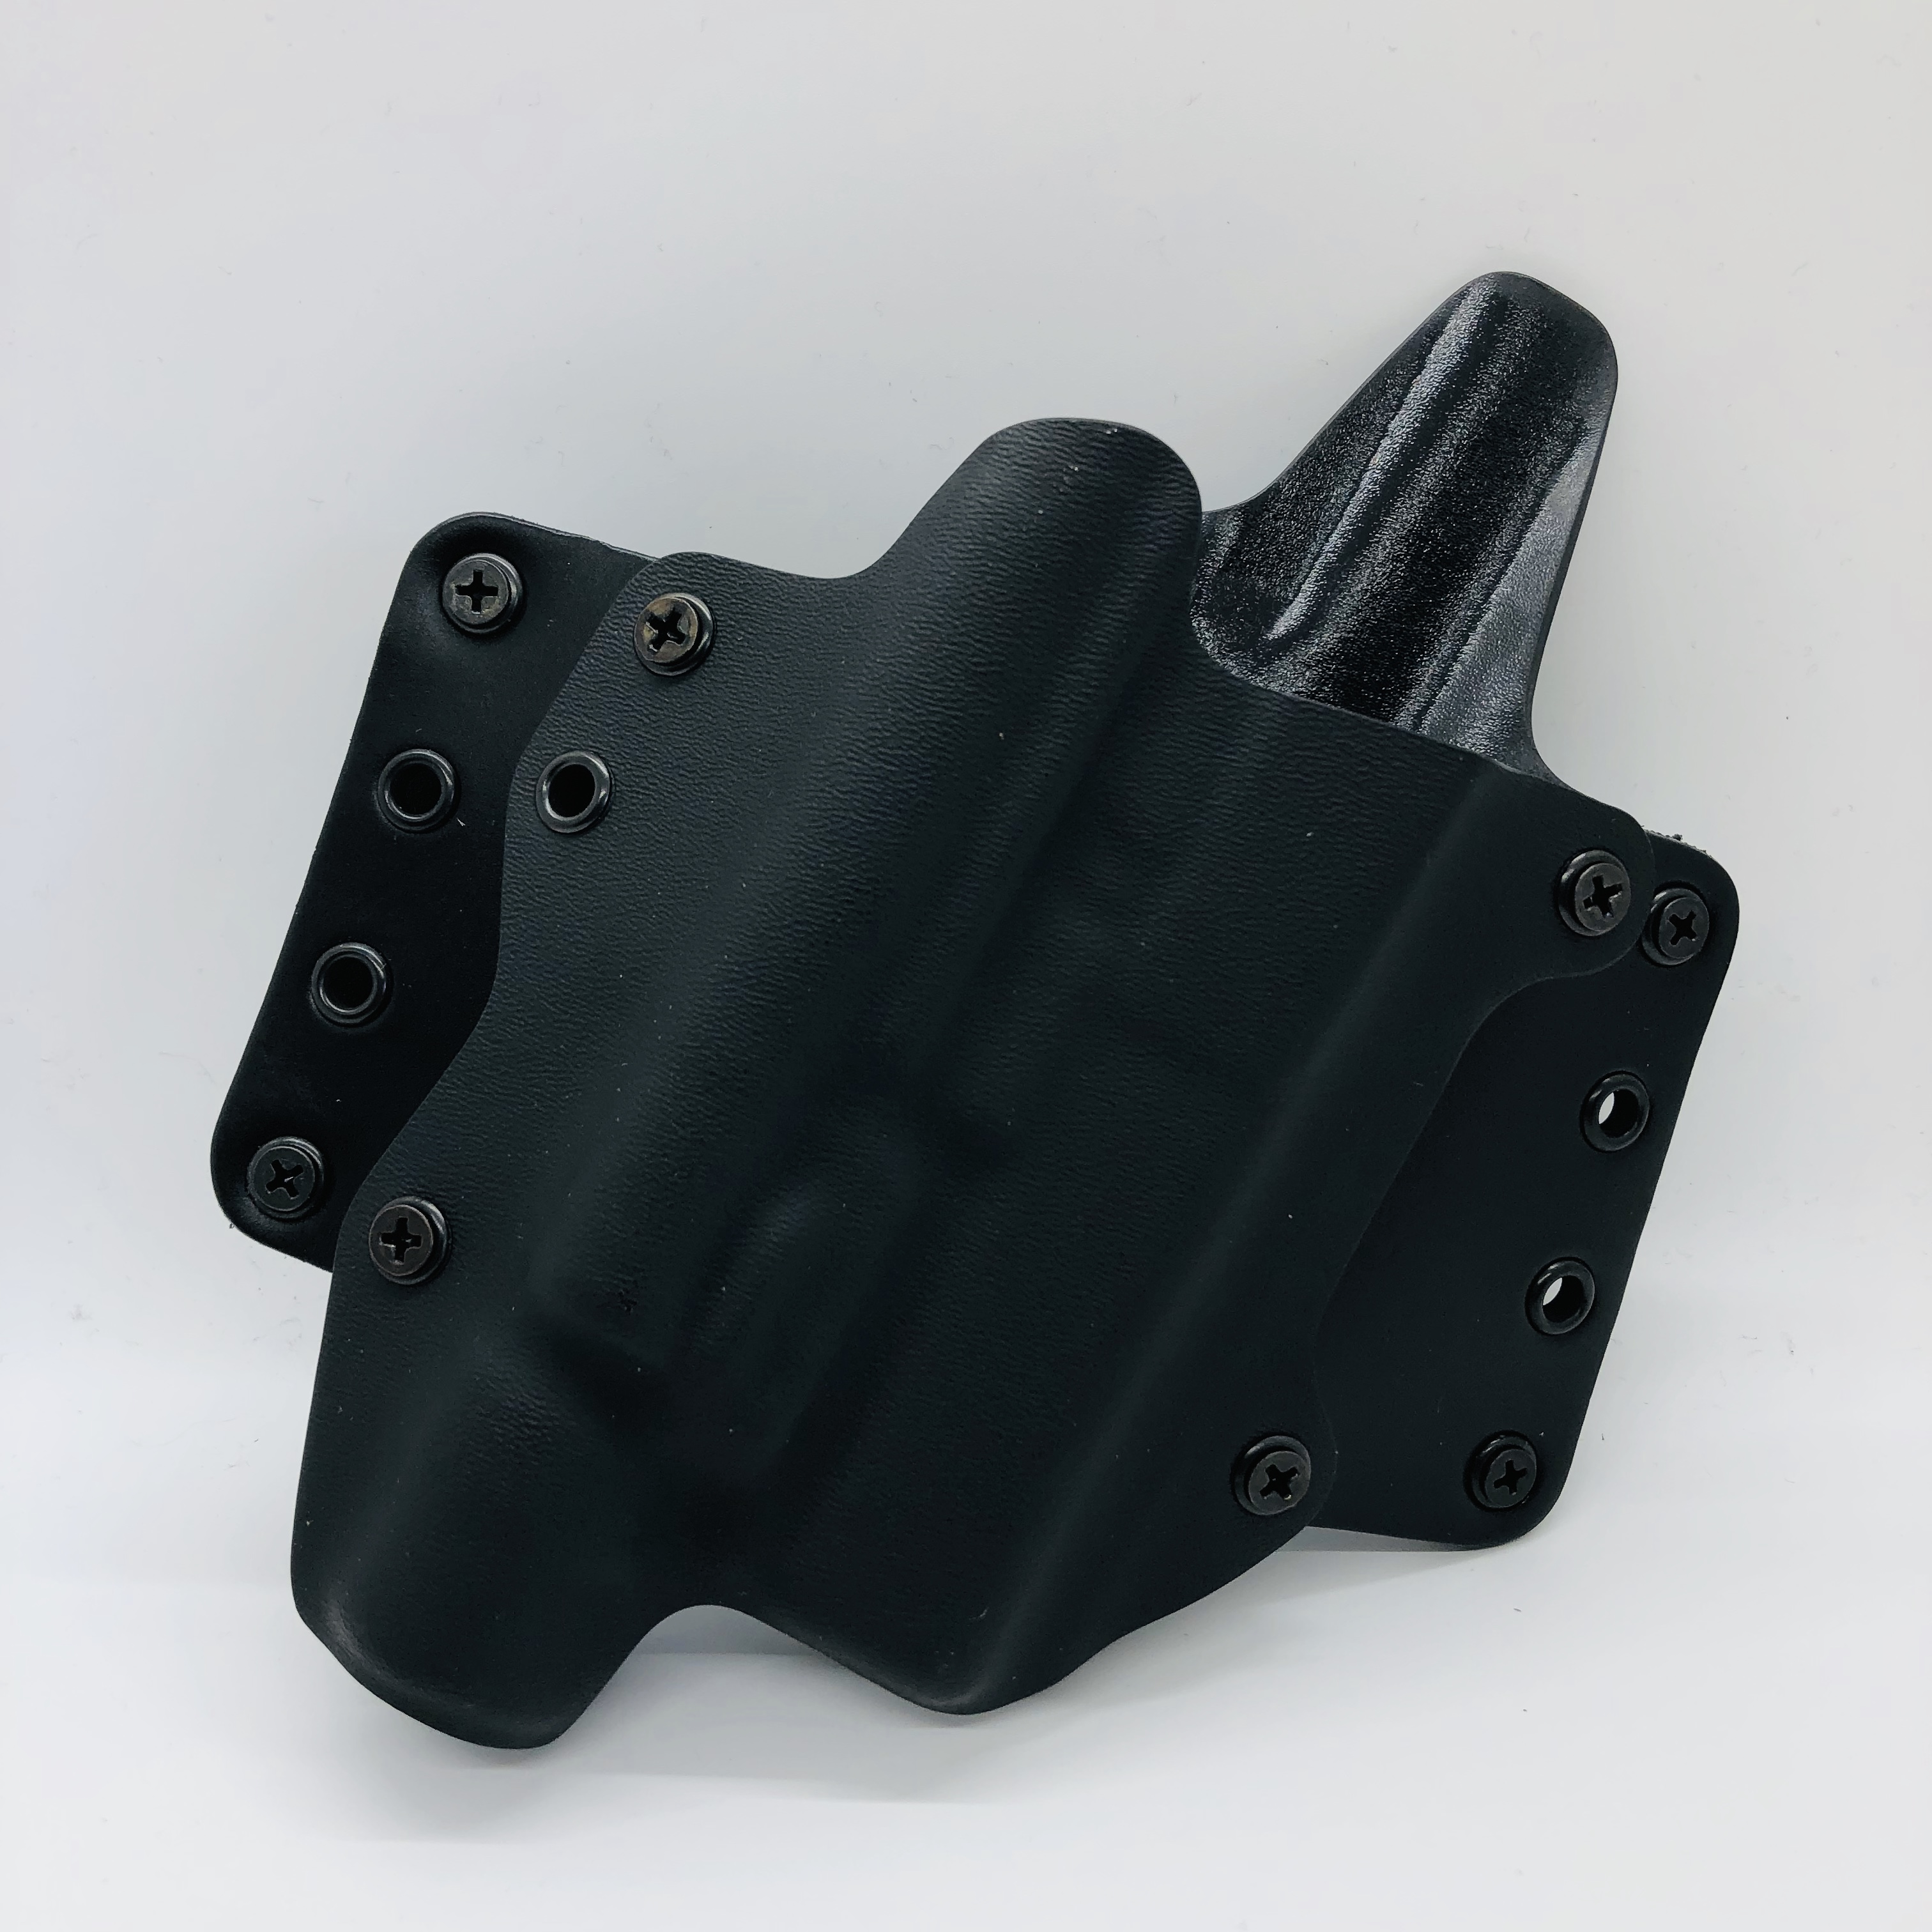 Blackpoint Tactical 100969 Leather Wing Light Mounted OWB 1.75" Holster For Glock 17/22 BLK Blackpoint Tactical 100969 Leather Wing Light Mounted OWB 1.75" Holster For Glock 17/22 BLK